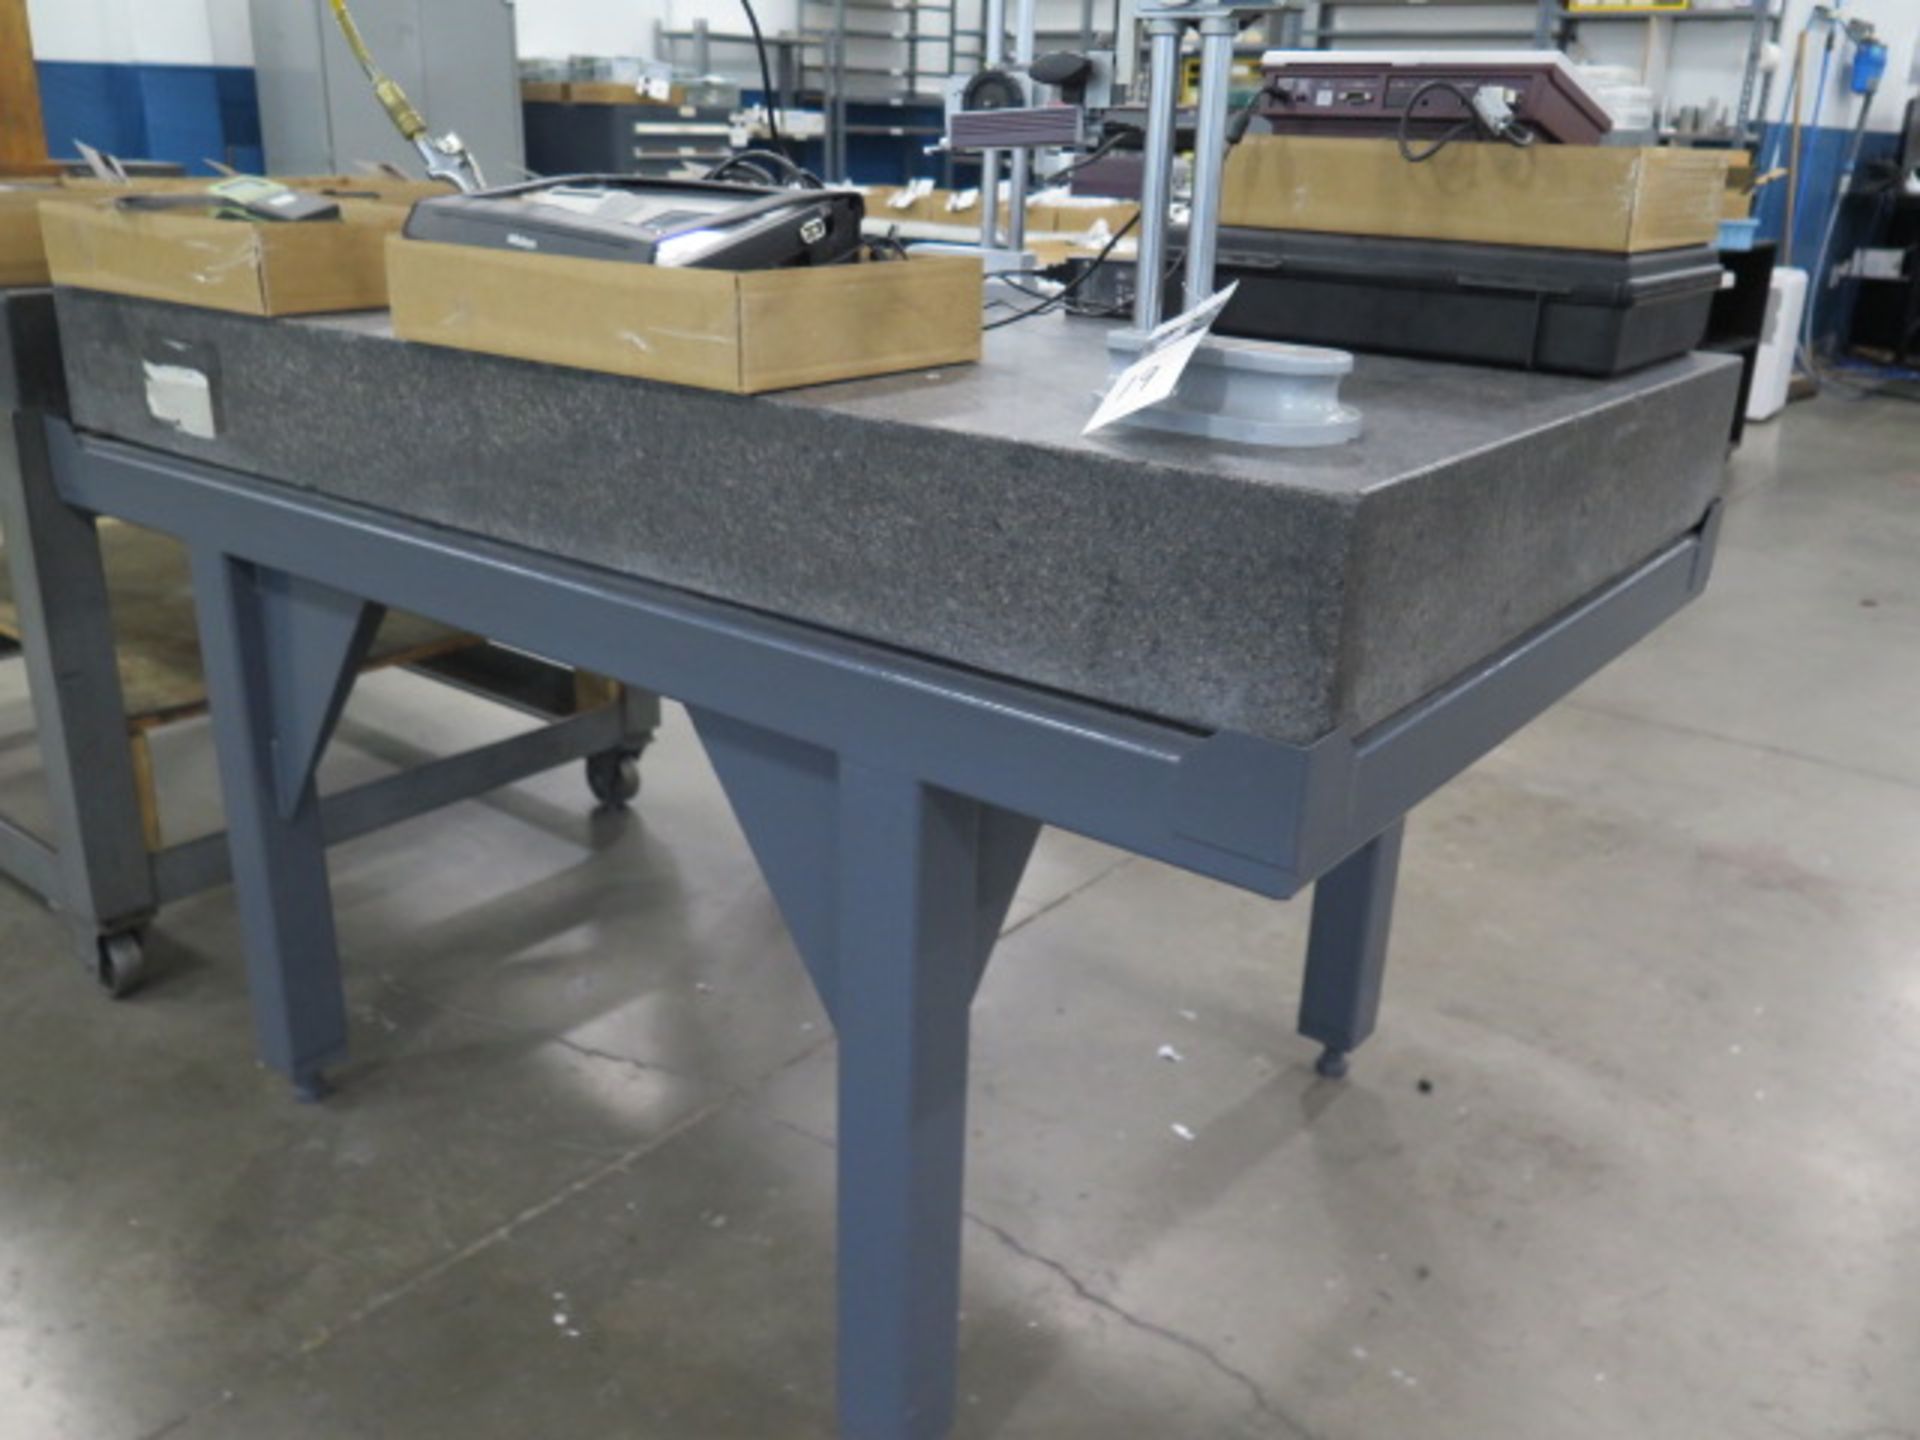 36" x 60" x 6" Granite Surface Plate w/ Stand (SOLD AS-IS - NO WARRANTY) - Image 3 of 5